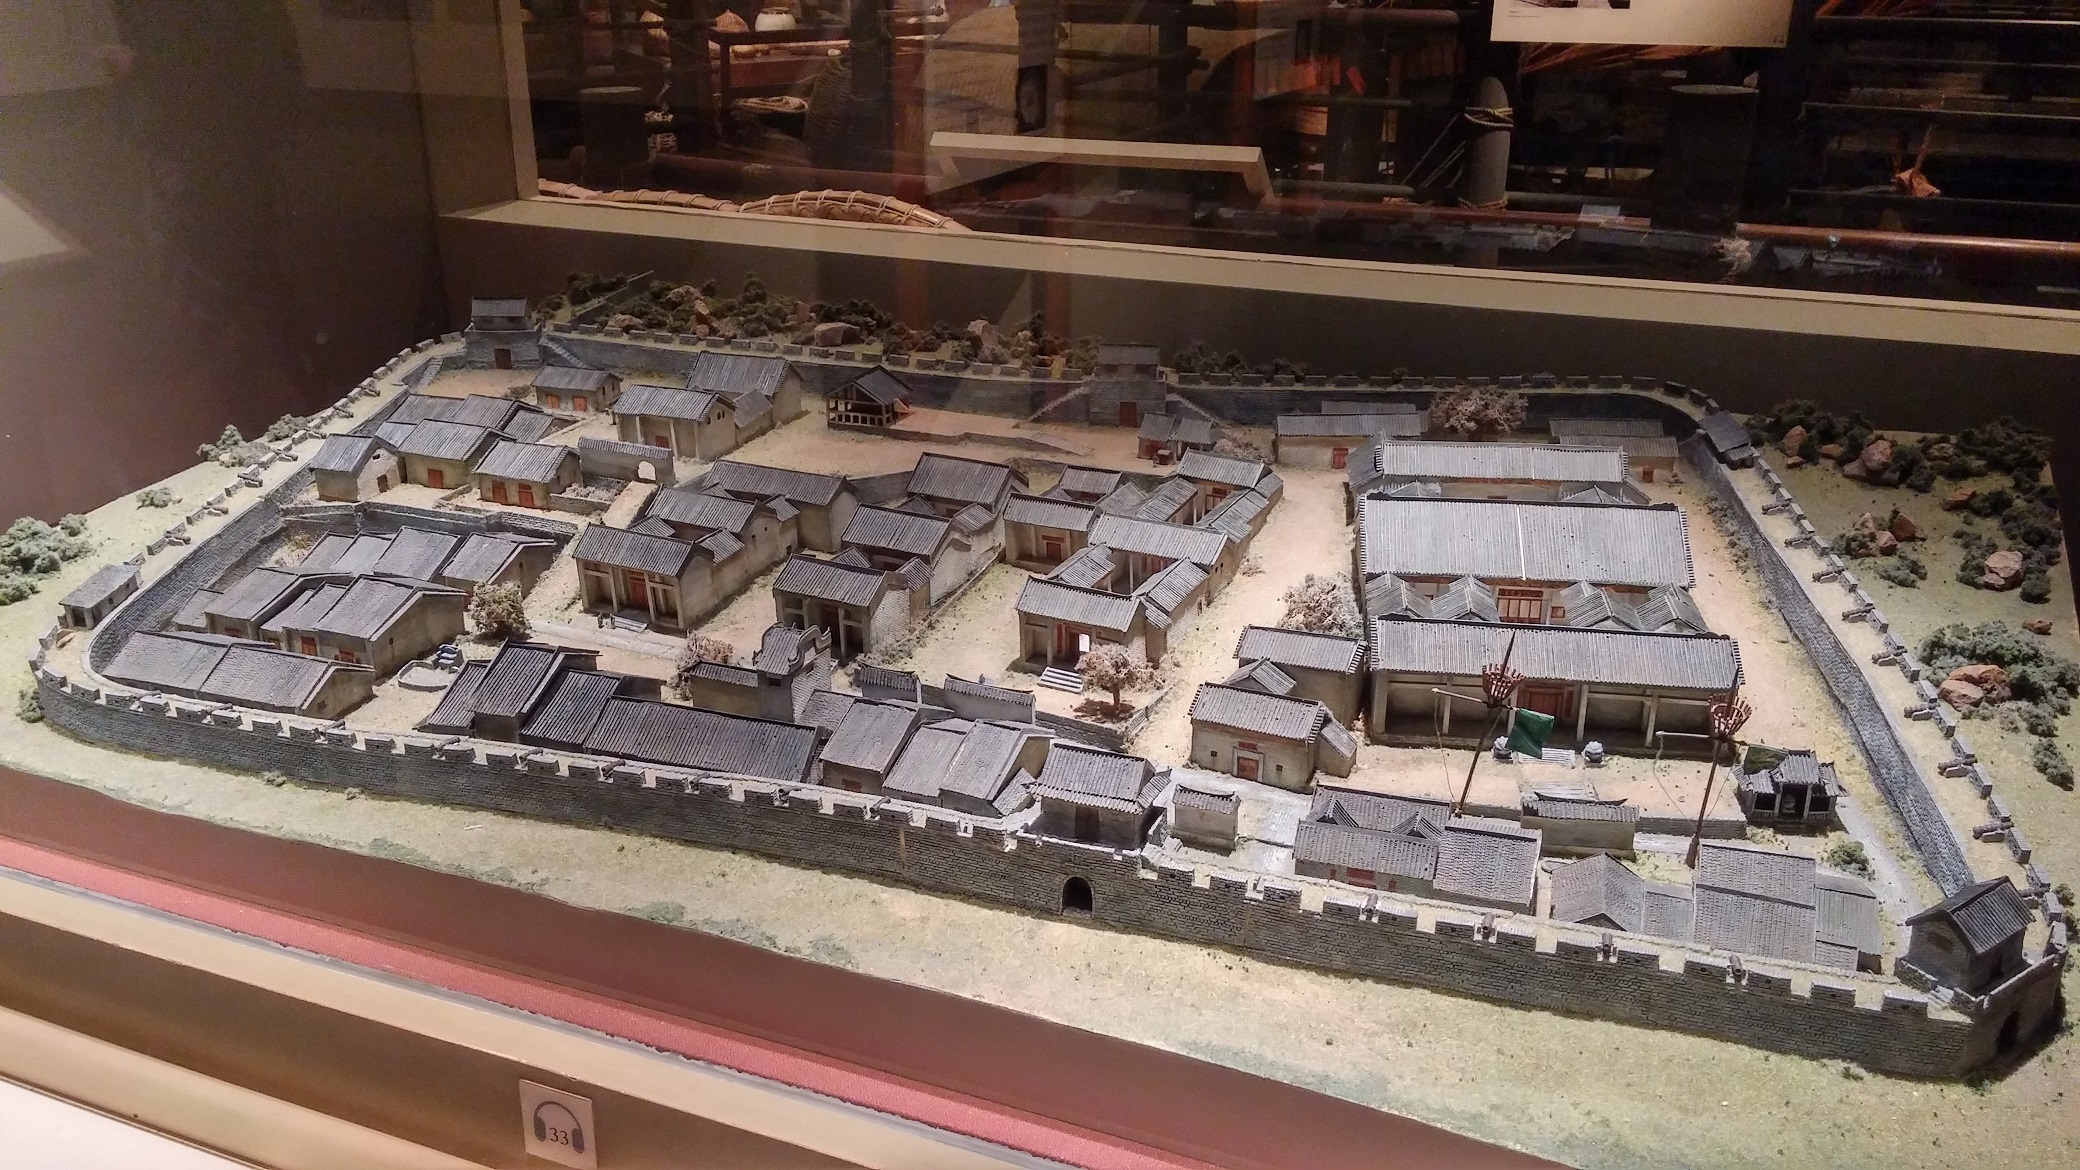 Kowloon Walled City model. The wall was demolished by Japanese to get the bricks for the expansion of Kai Tak Airport.